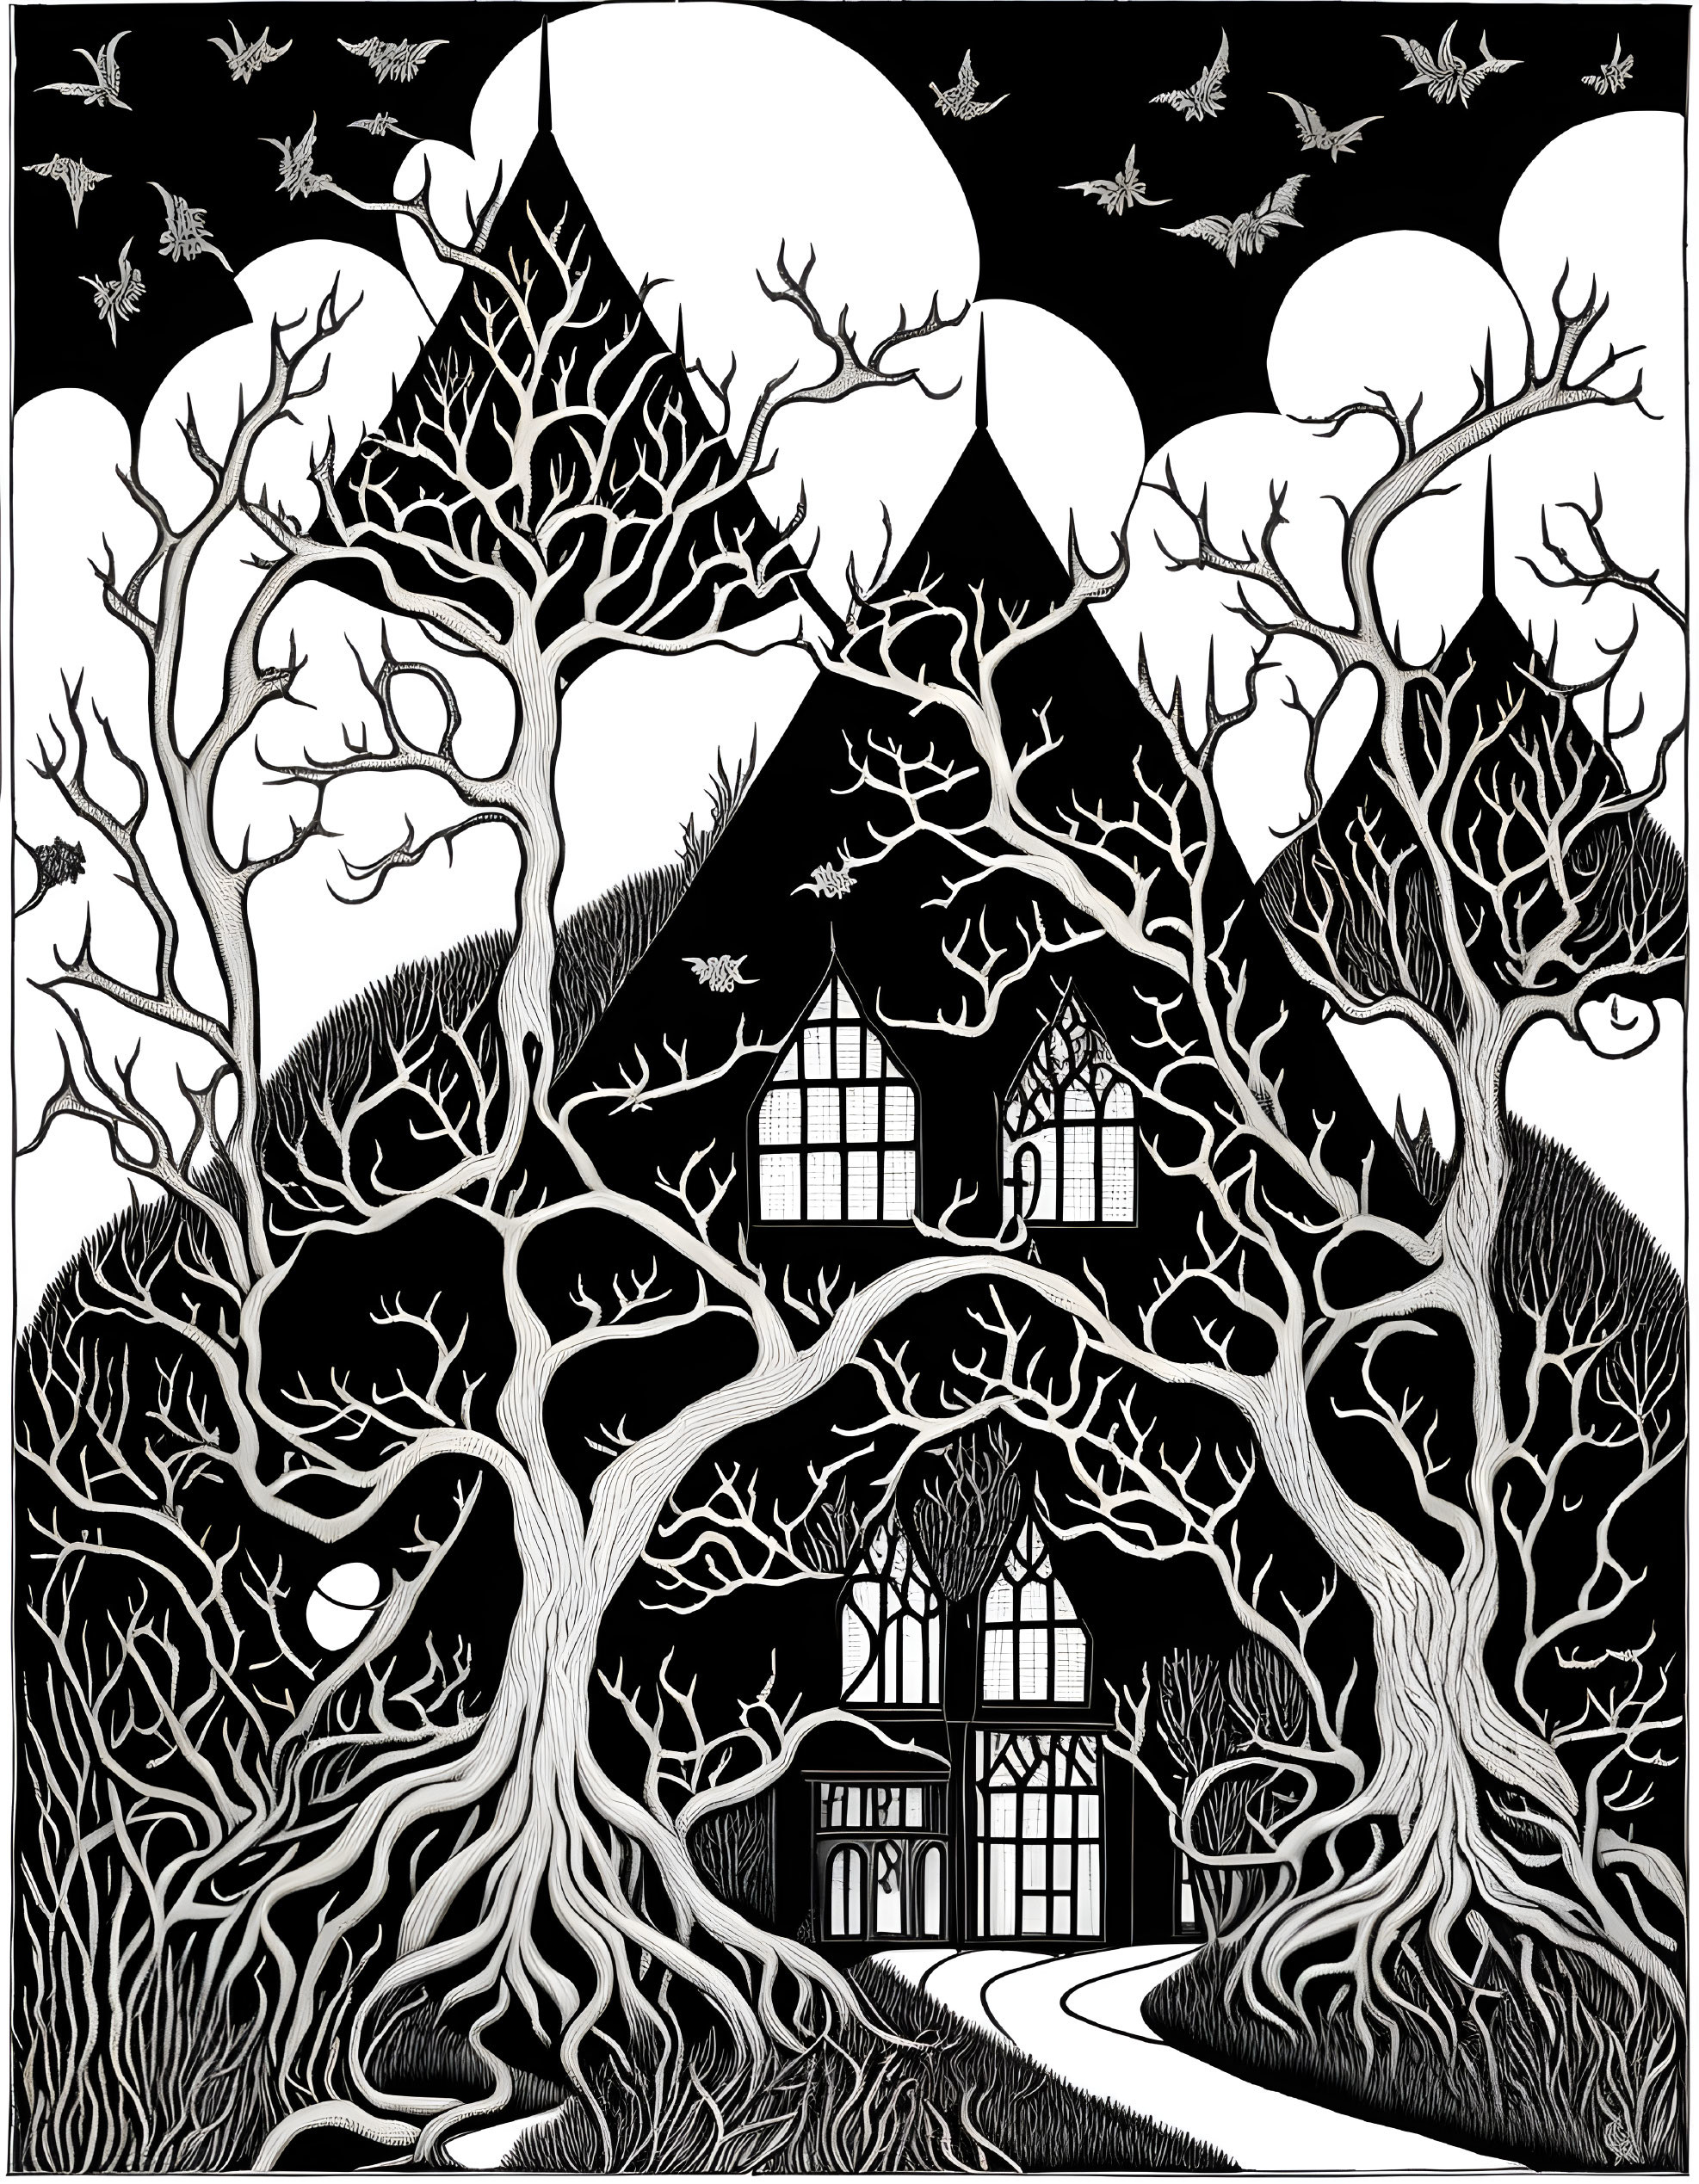 Detailed black and white whimsical house illustration with twisting trees and full moon